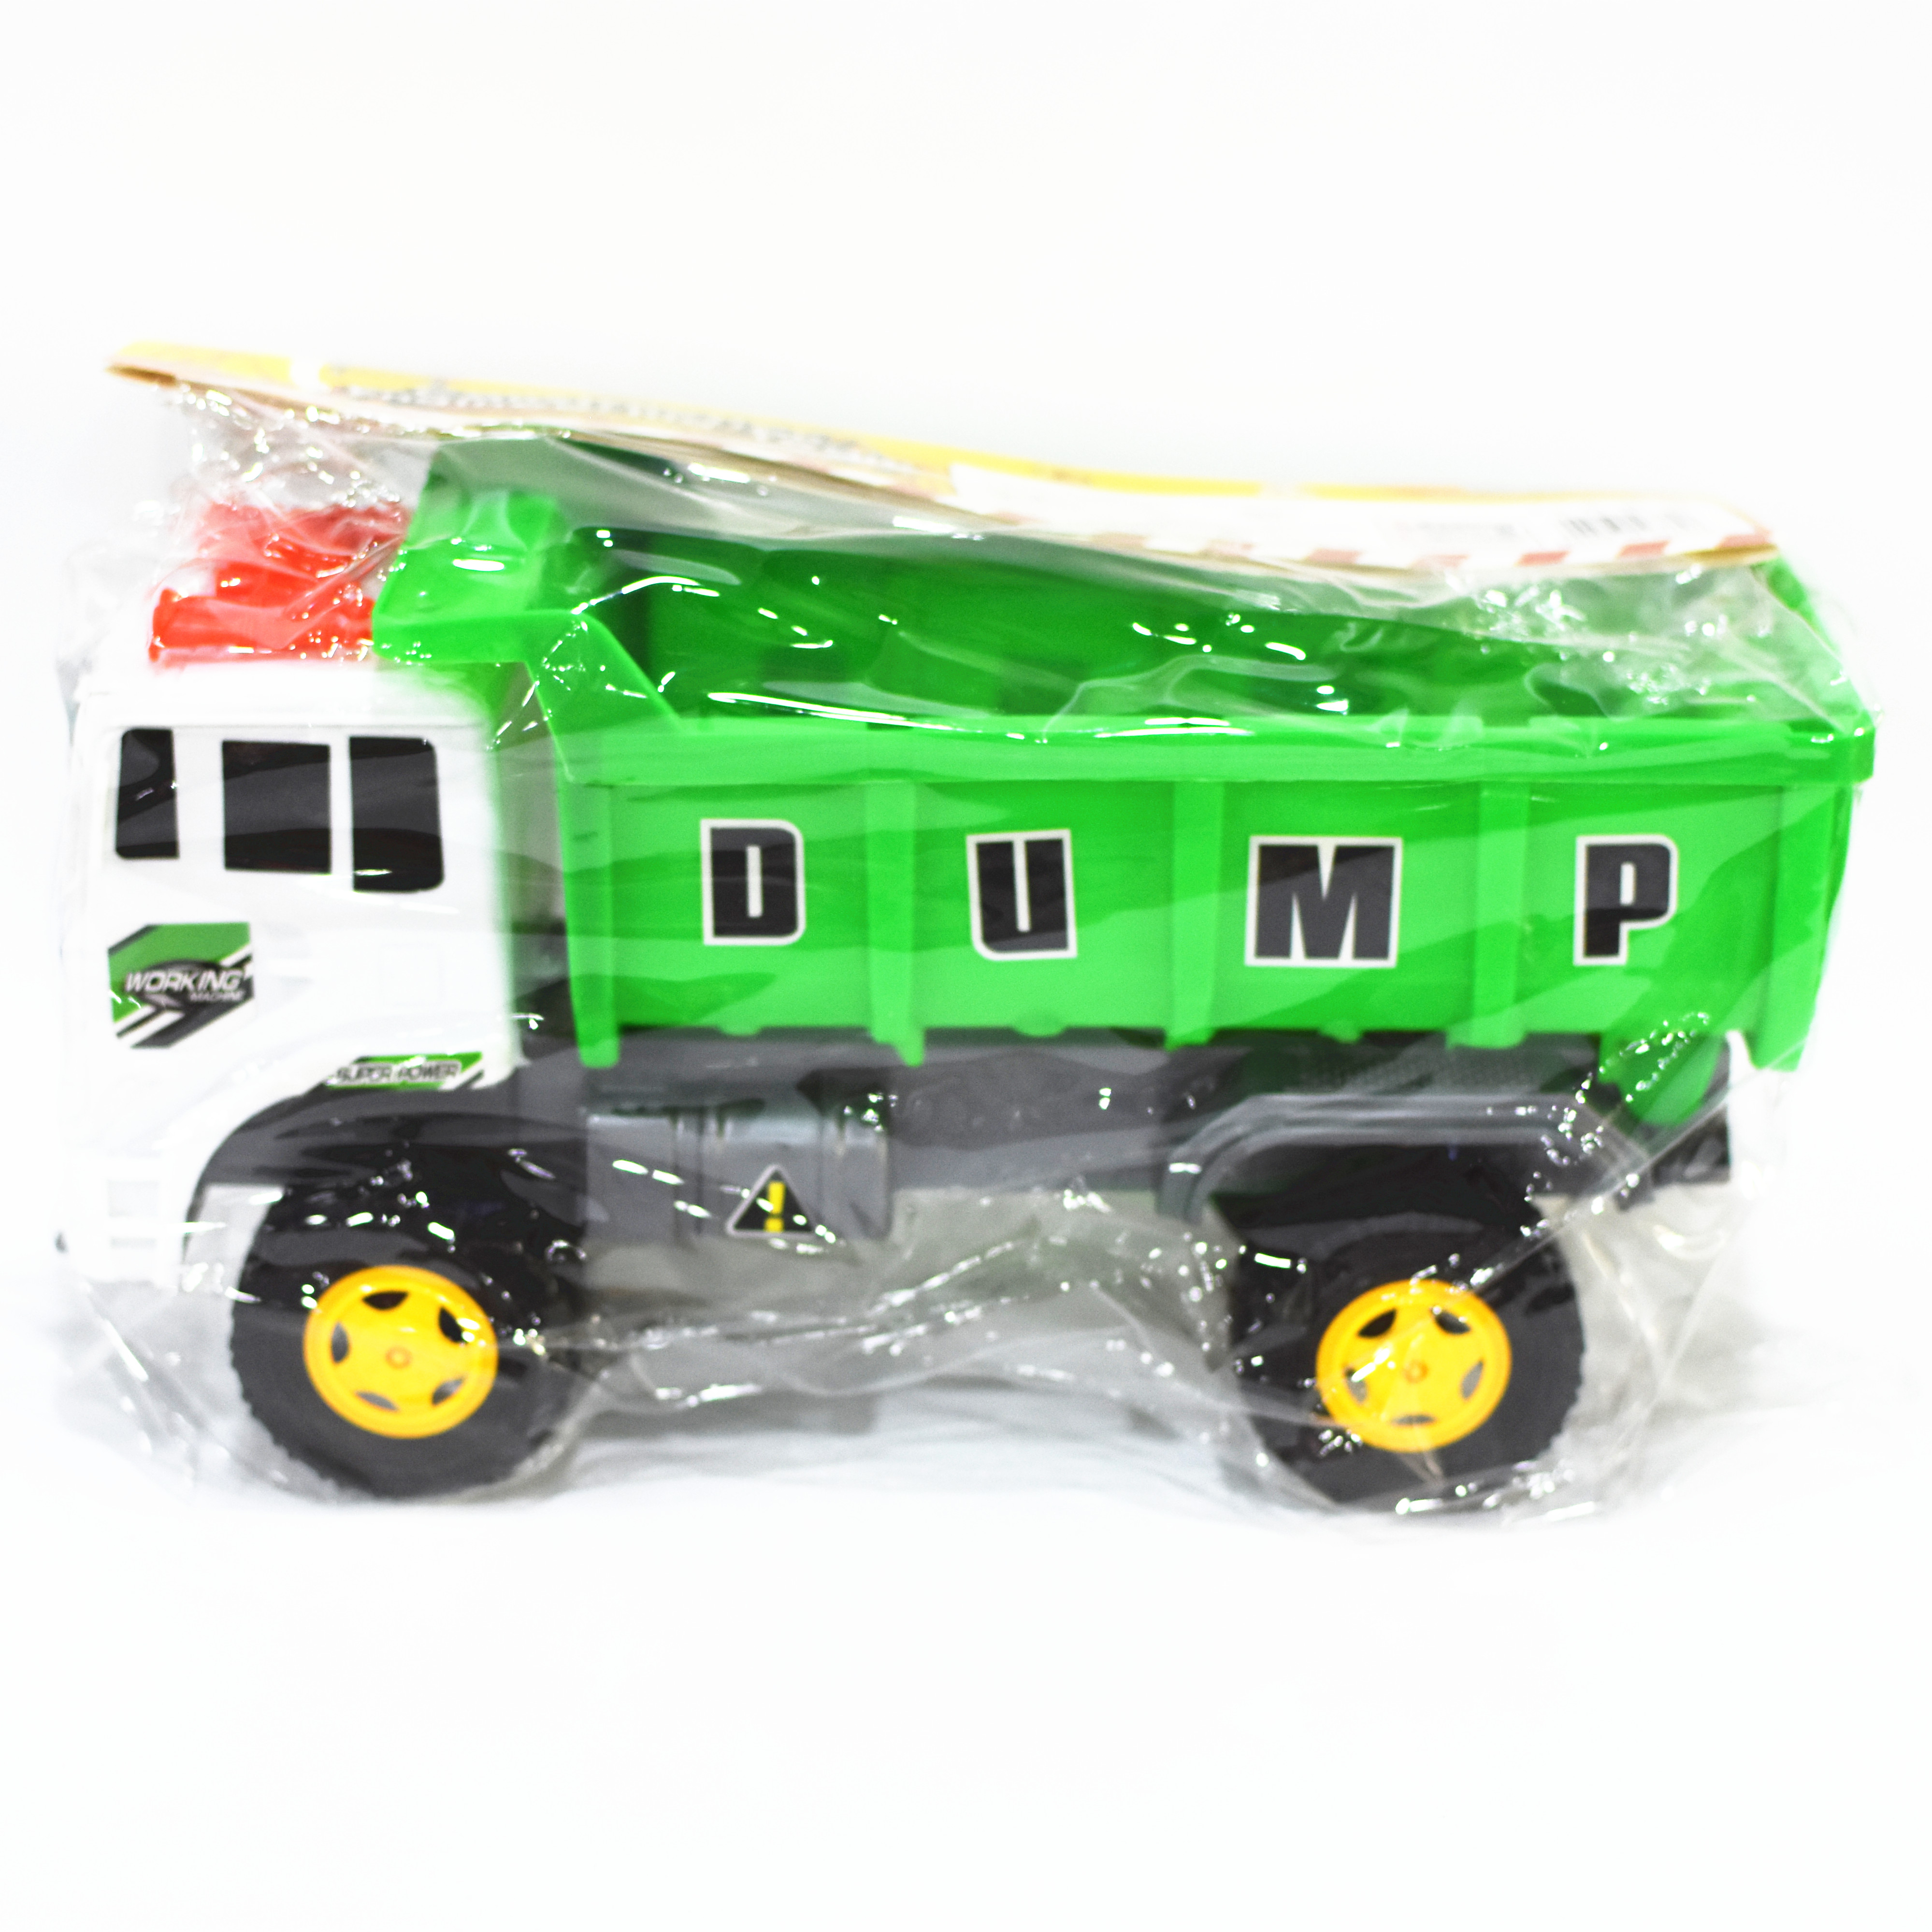 FREE WHEEL TRUCK TOY LY1821